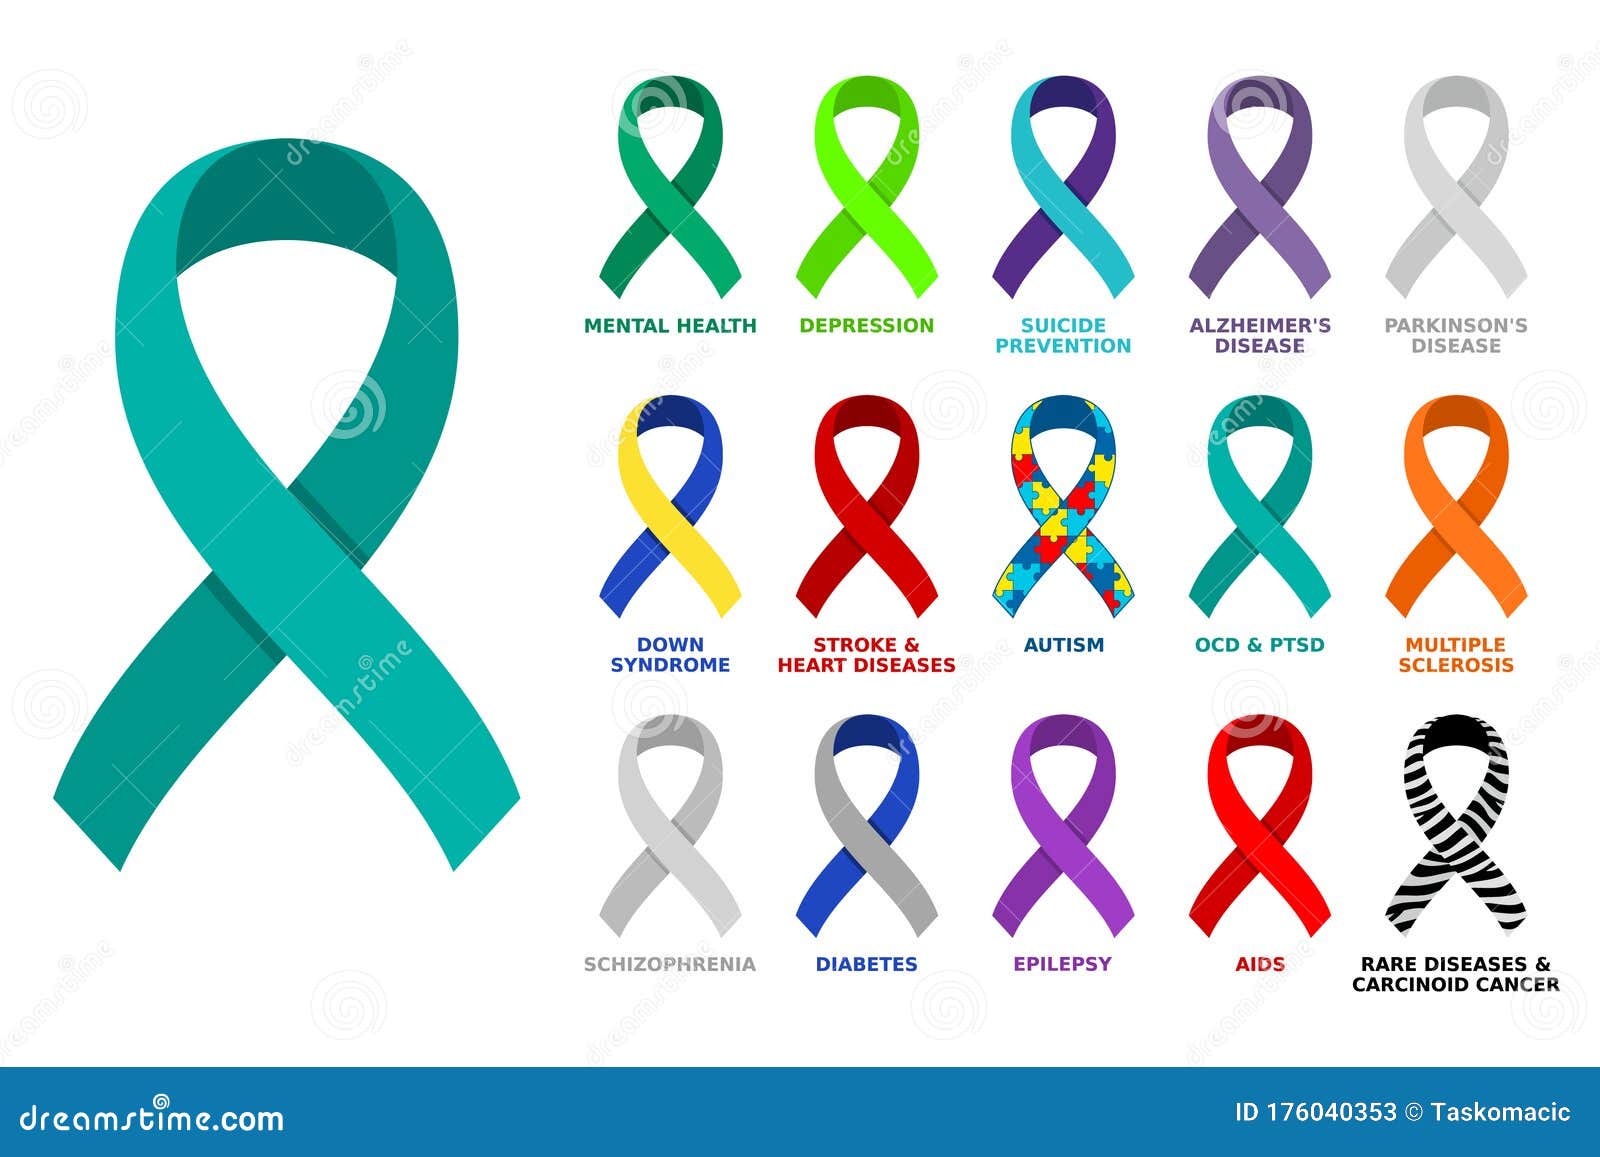 Different Colored Awareness Ribbon Collection. Awareness Ribbons For